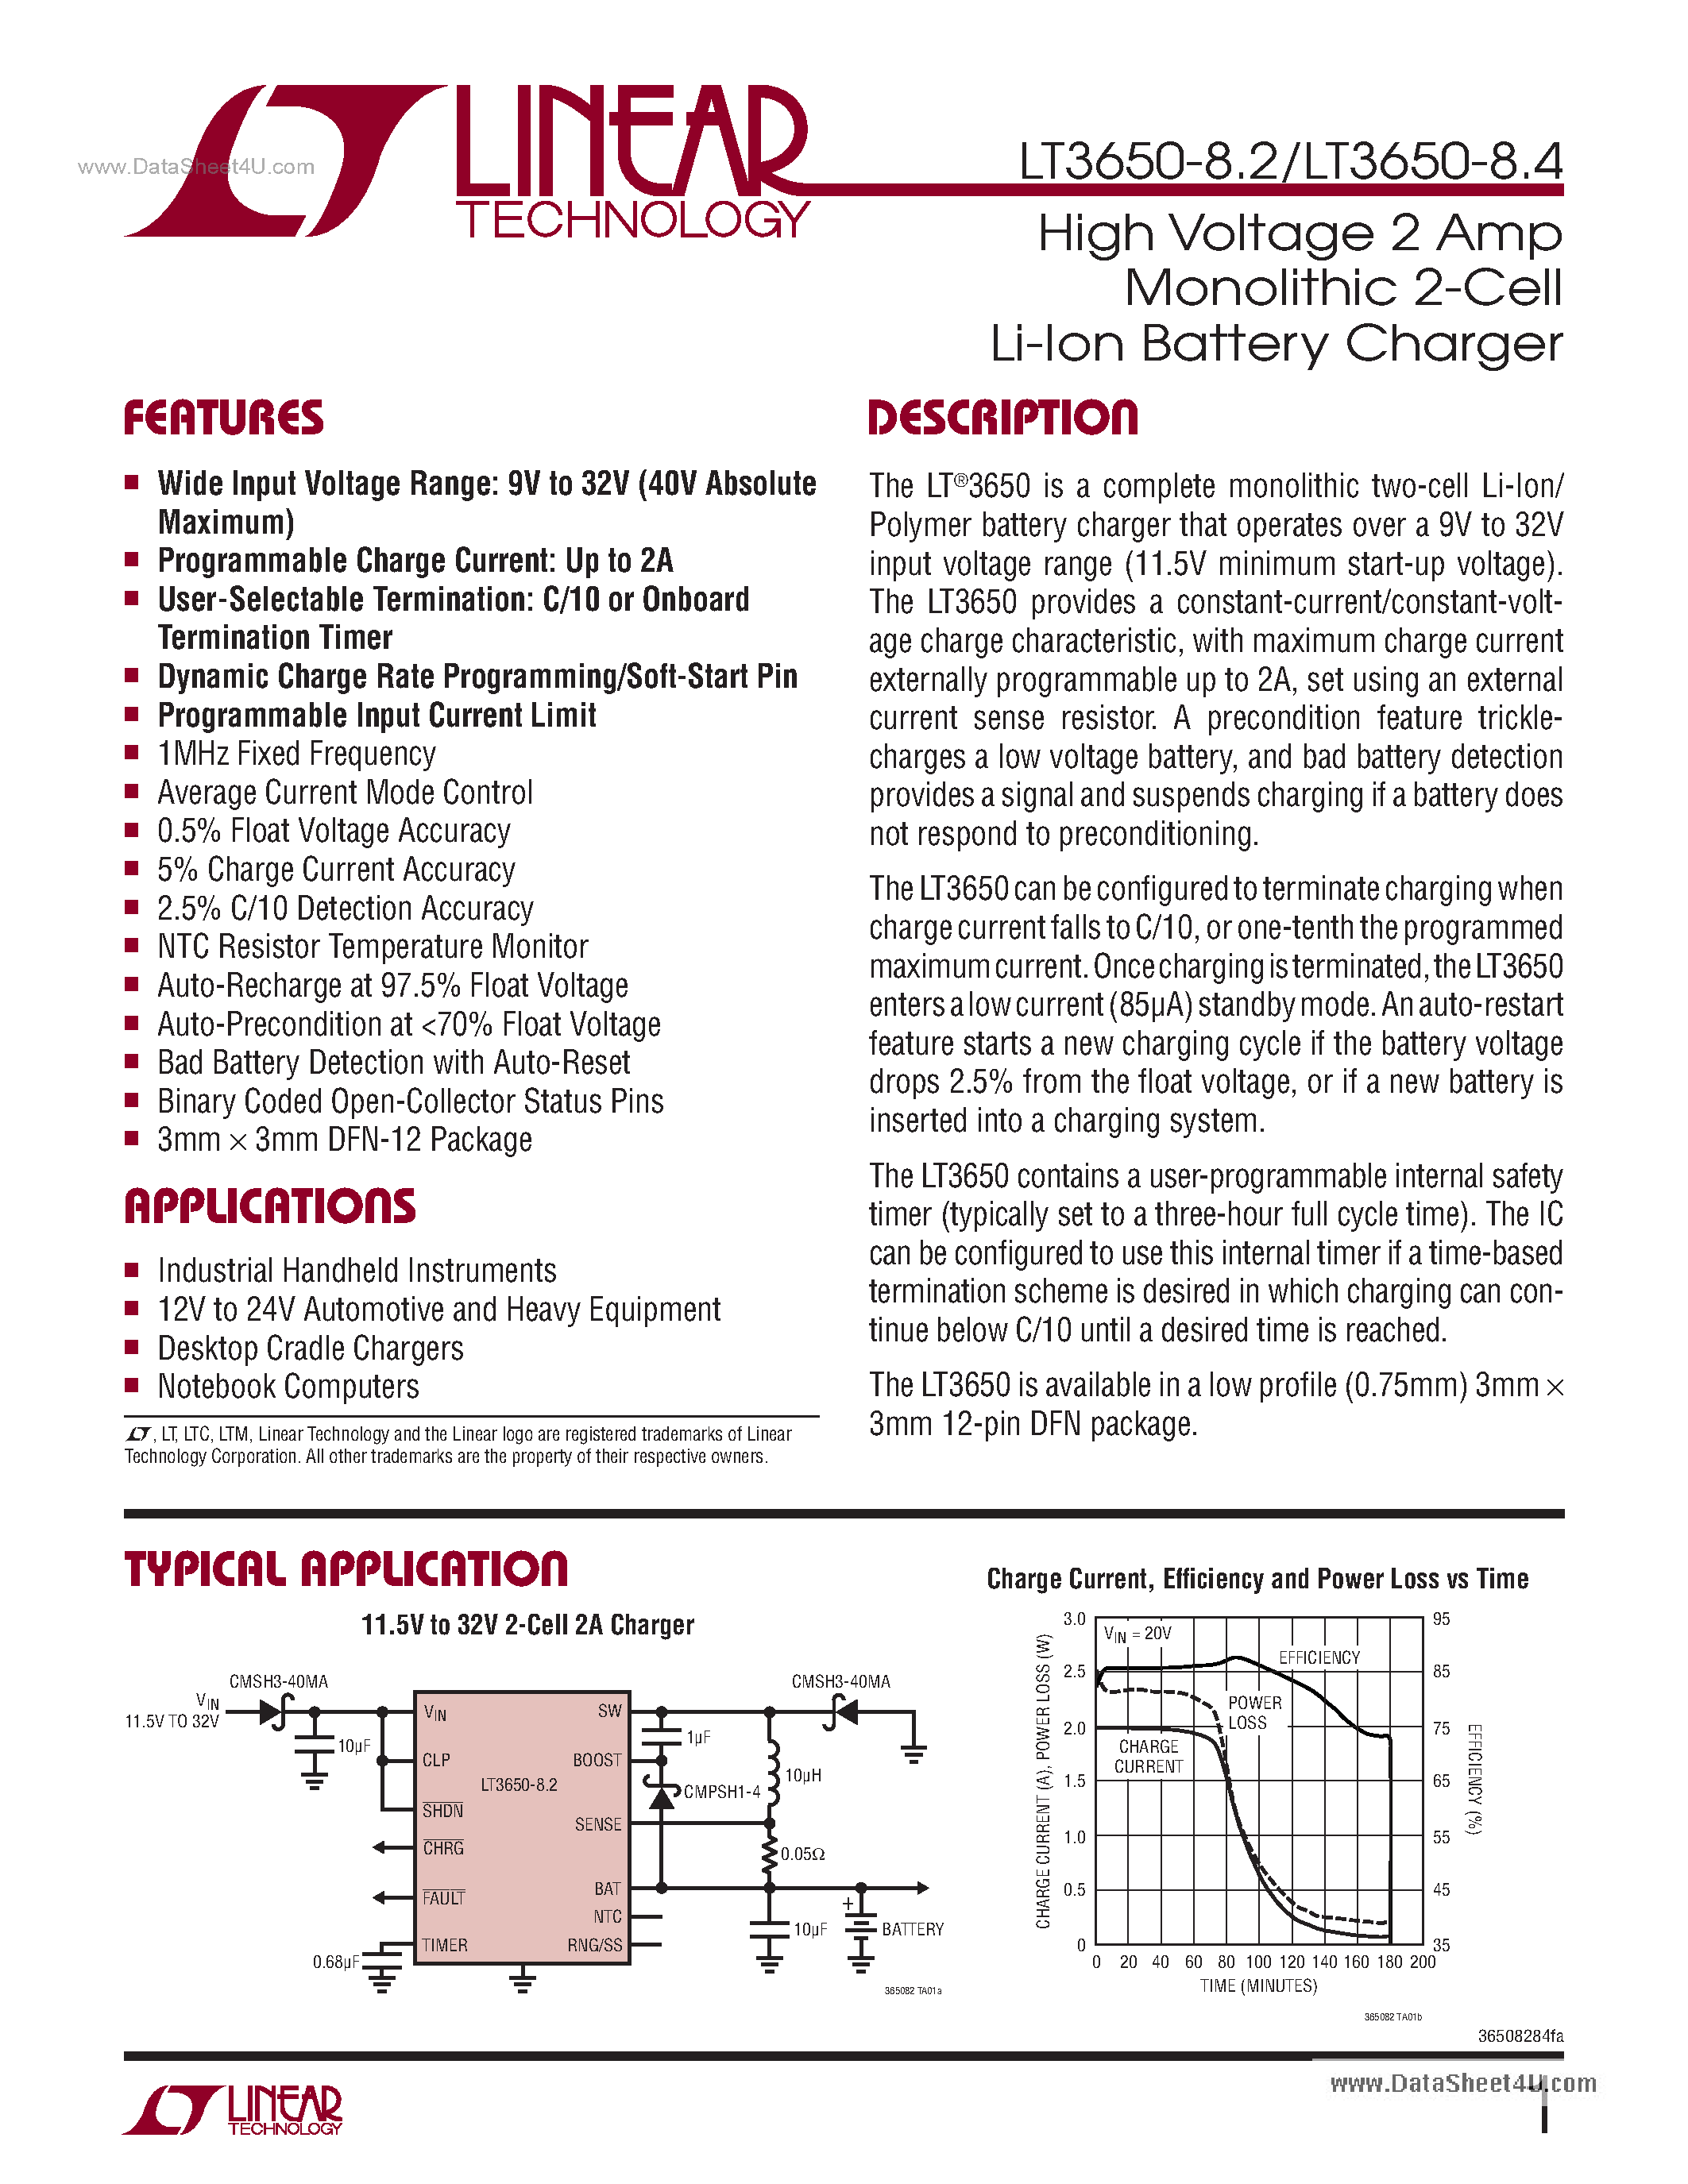 Datasheet LT3650-8.2 - (LT3650-8.2 / -8.4) High Voltage 2 Amp Monolithic Li-Ion Battery Charger page 1